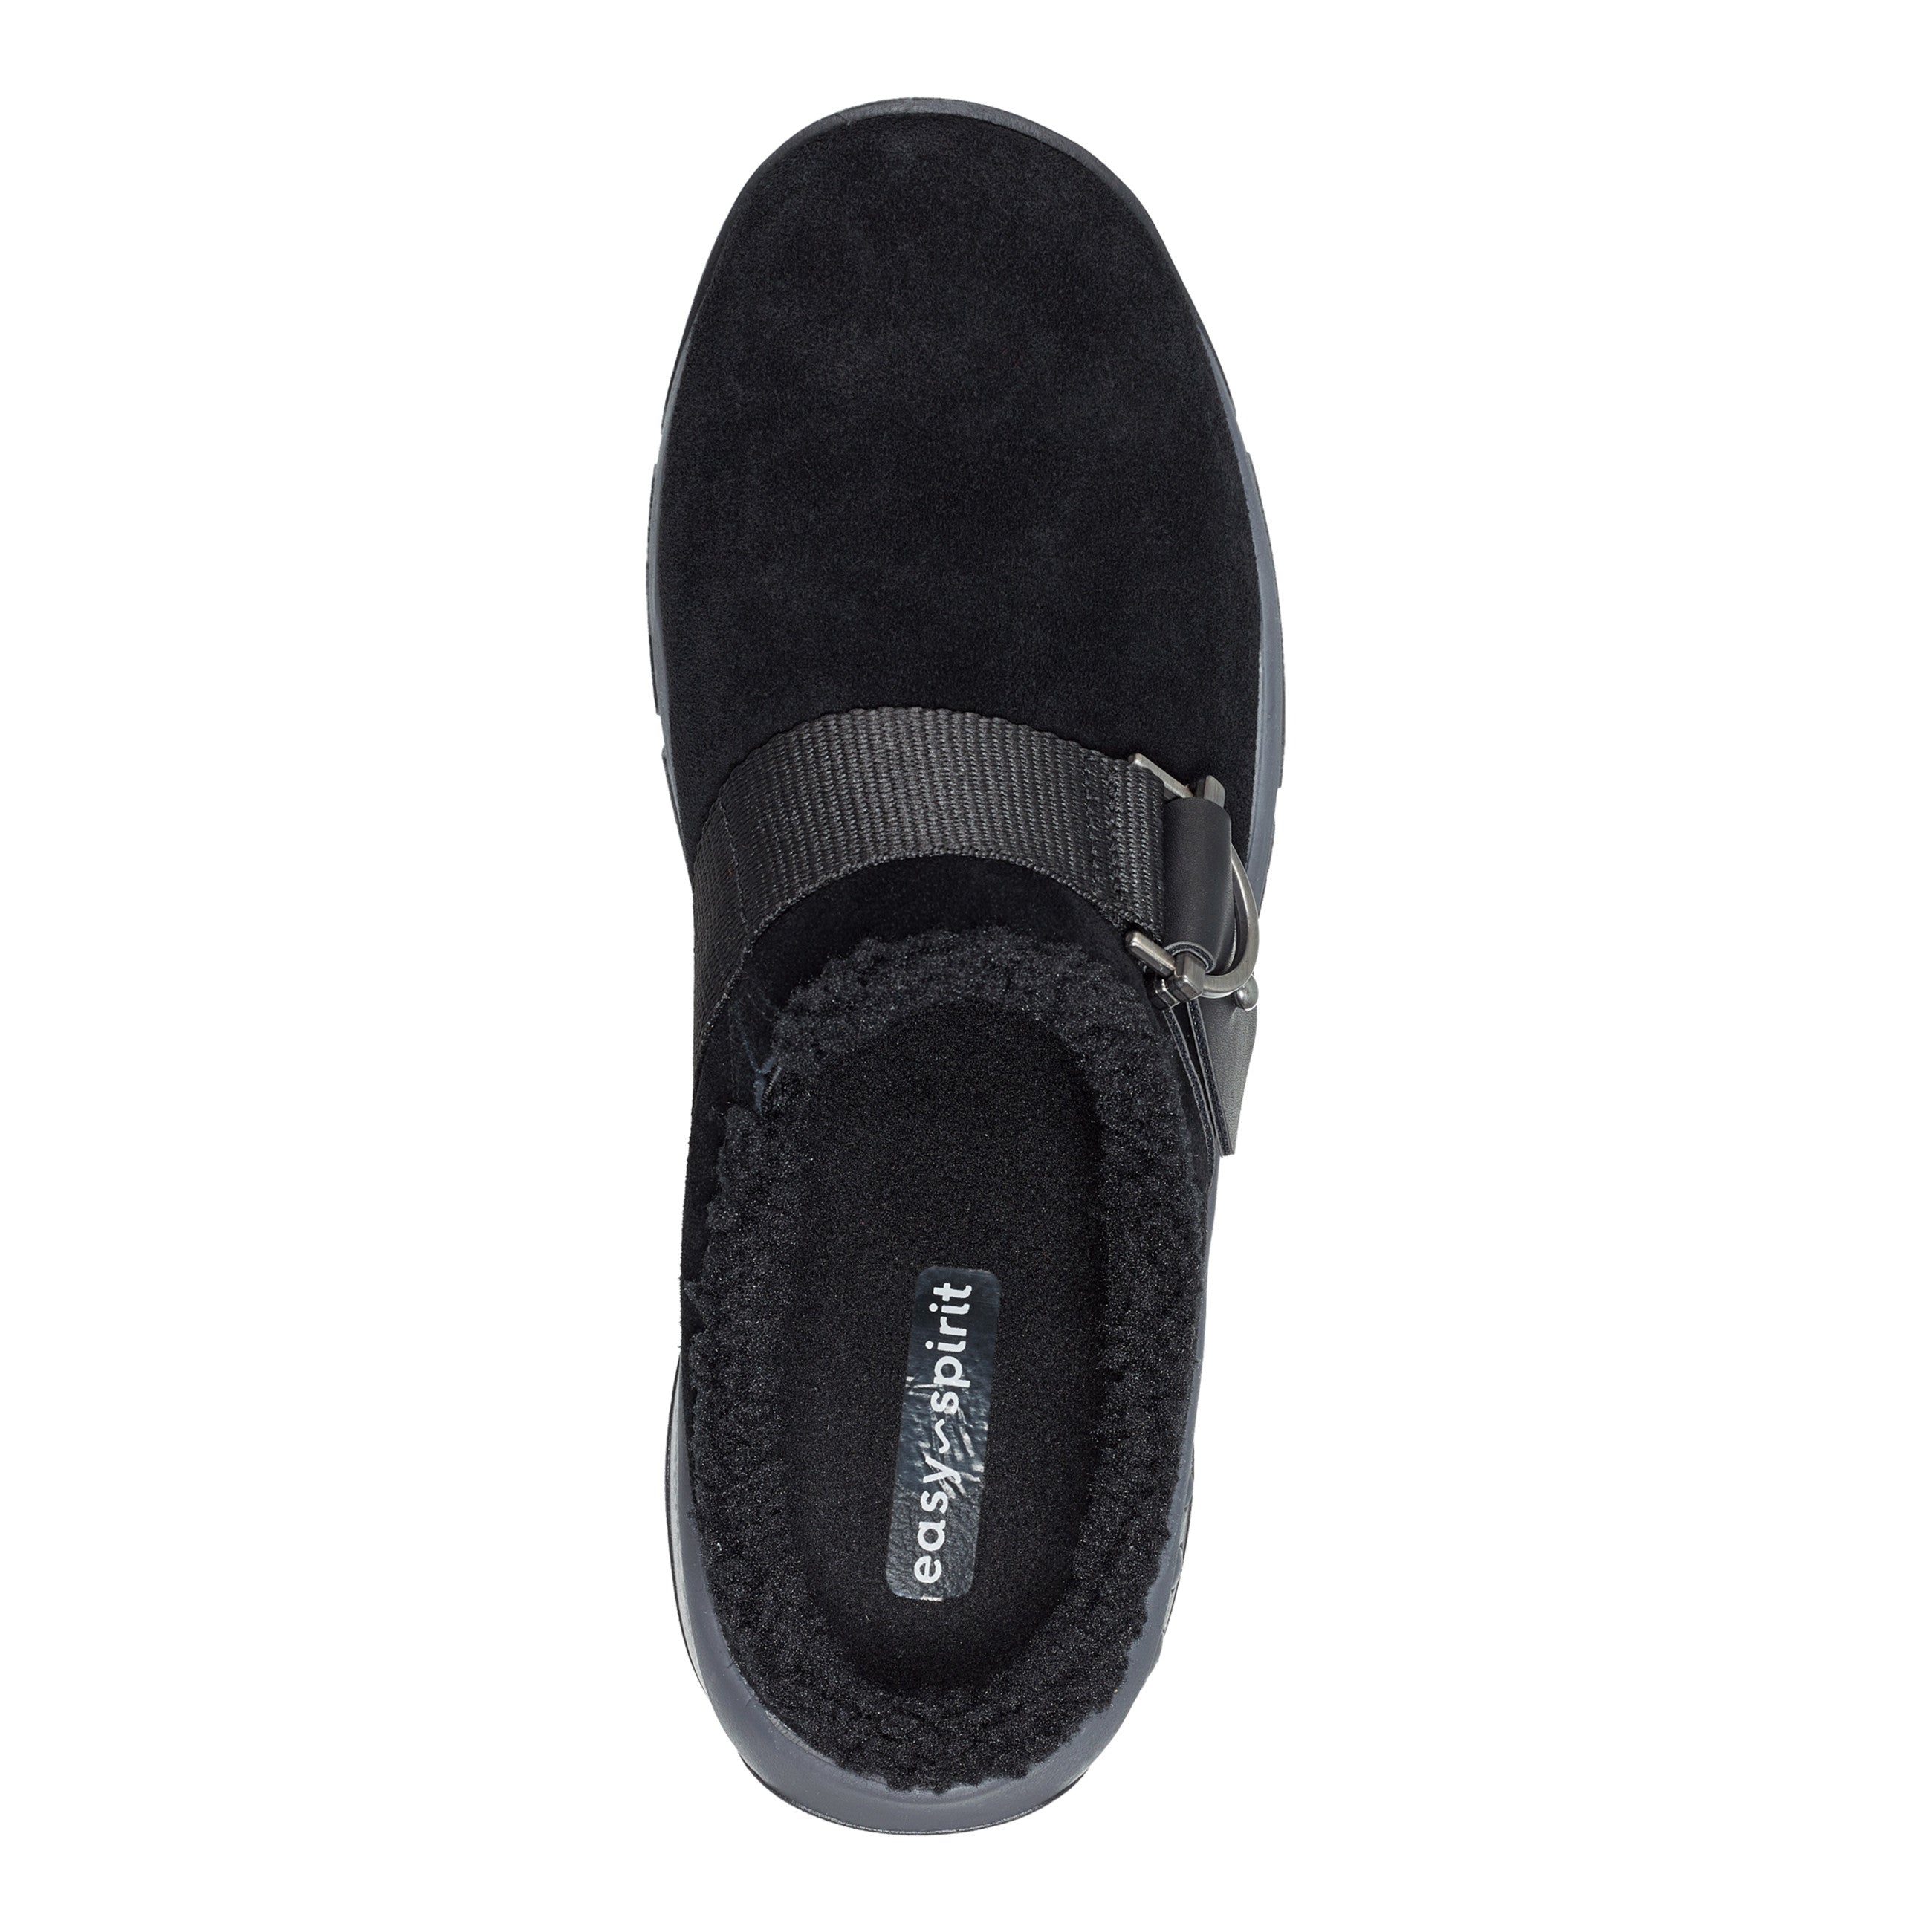 Wend Slip-on Casual Clogs